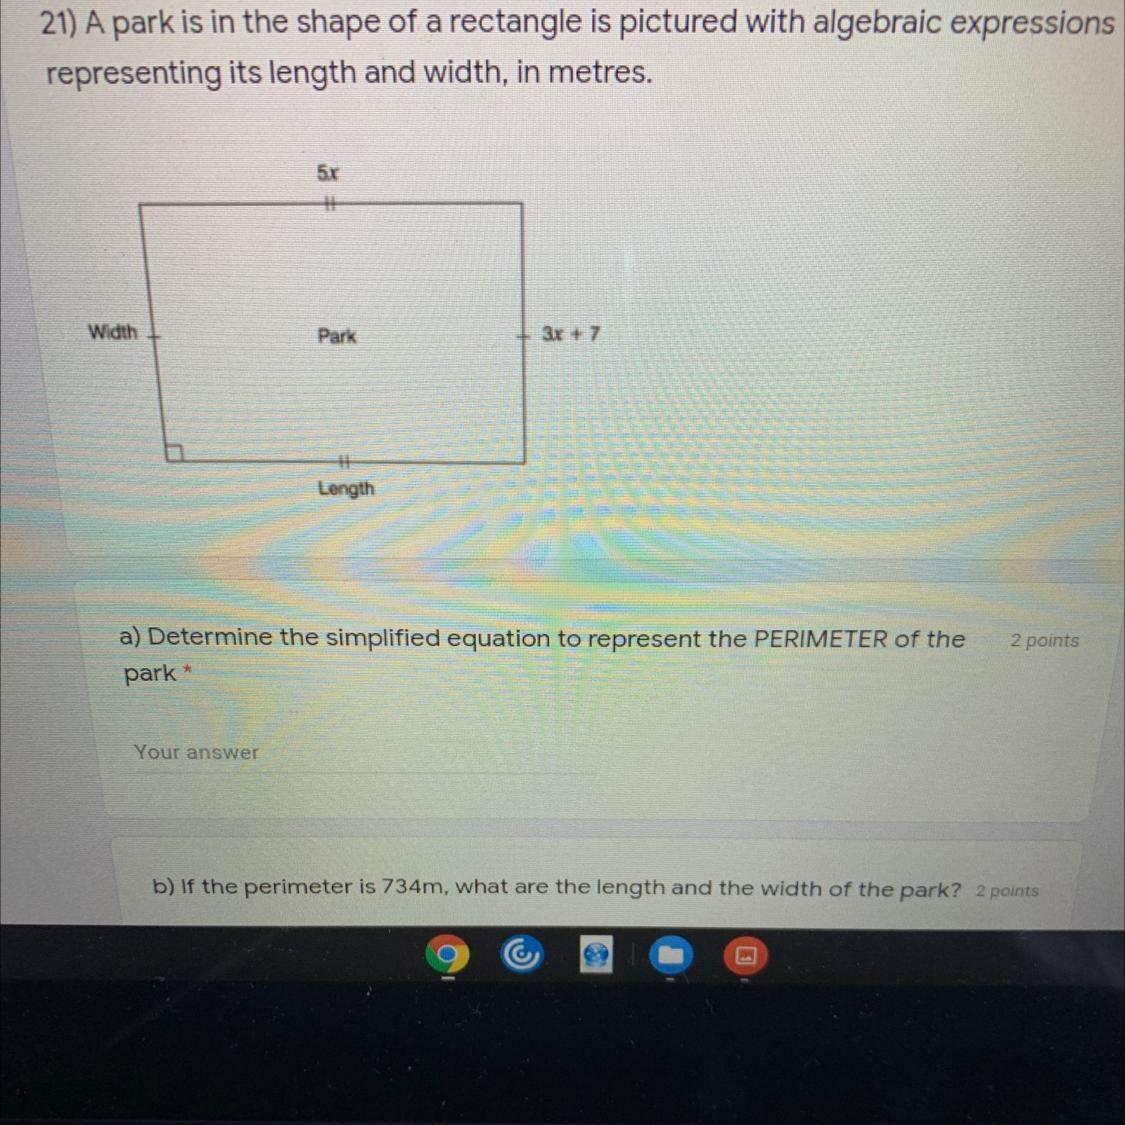 You Need To Answer A And B!!! PLEASE HELP 